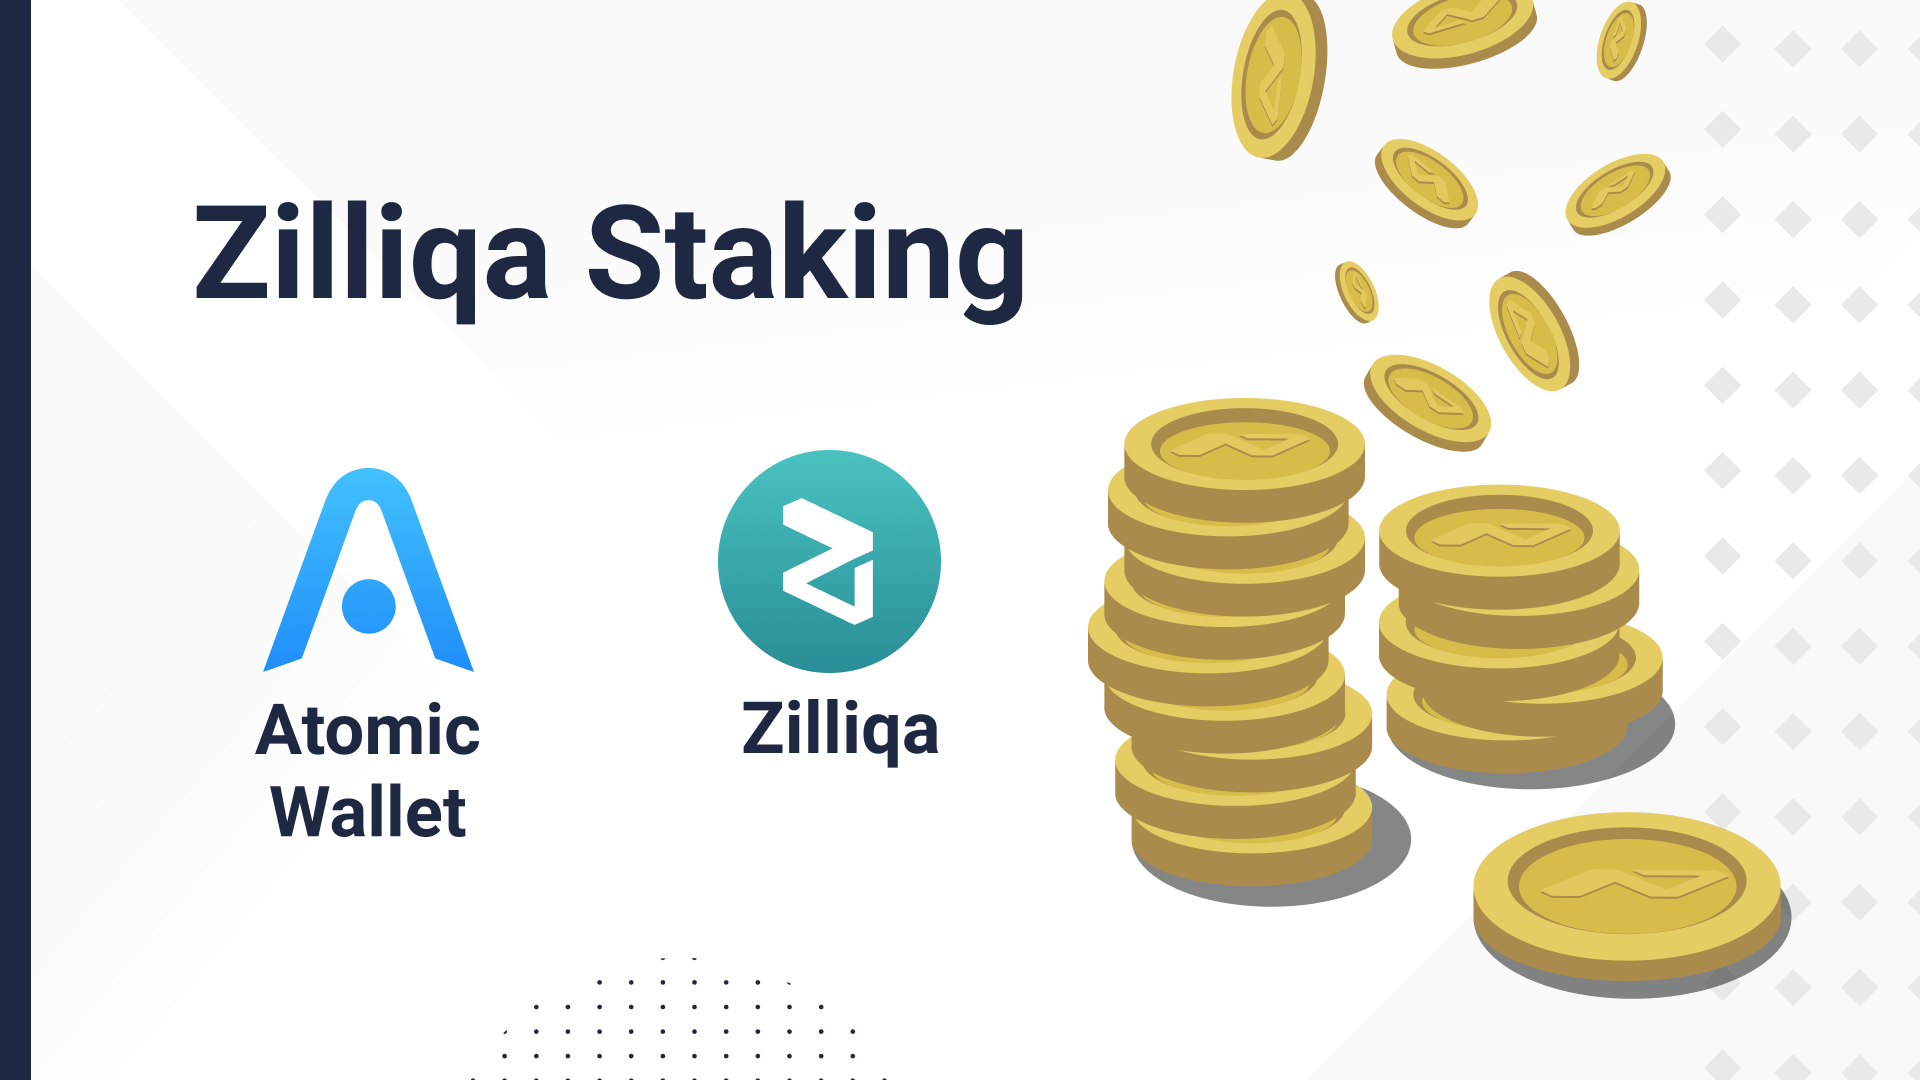 Binance to Support Staking of Zilliqa (ZIL) Later this Month - Ethereum World News